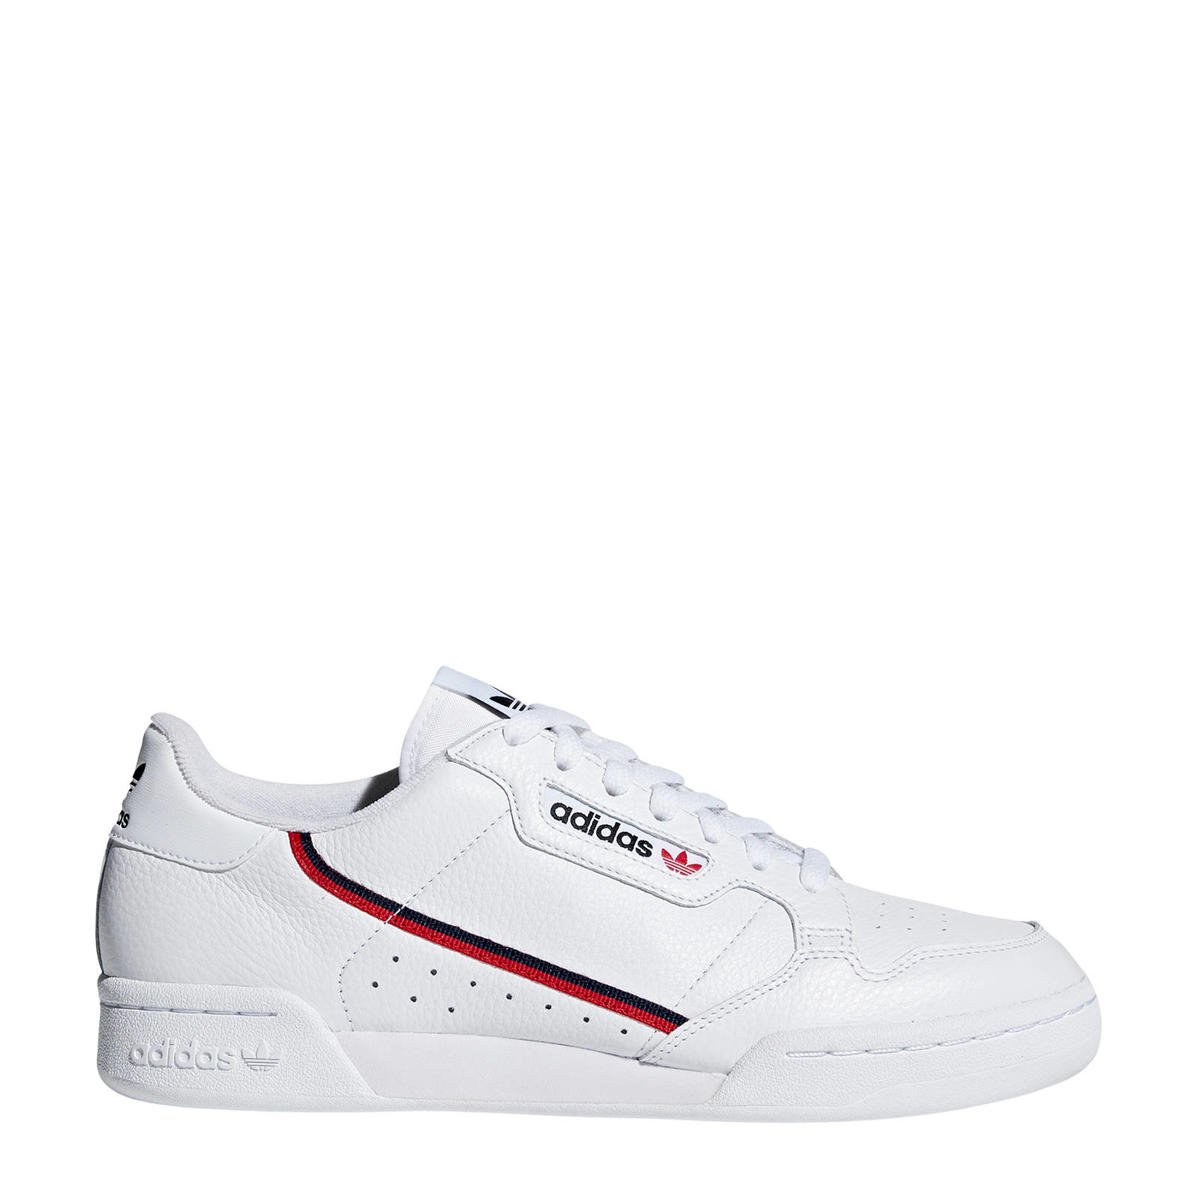 luchthaven zaad Antipoison adidas Originals Continental 80 sneakers wit/donkerblauw | wehkamp